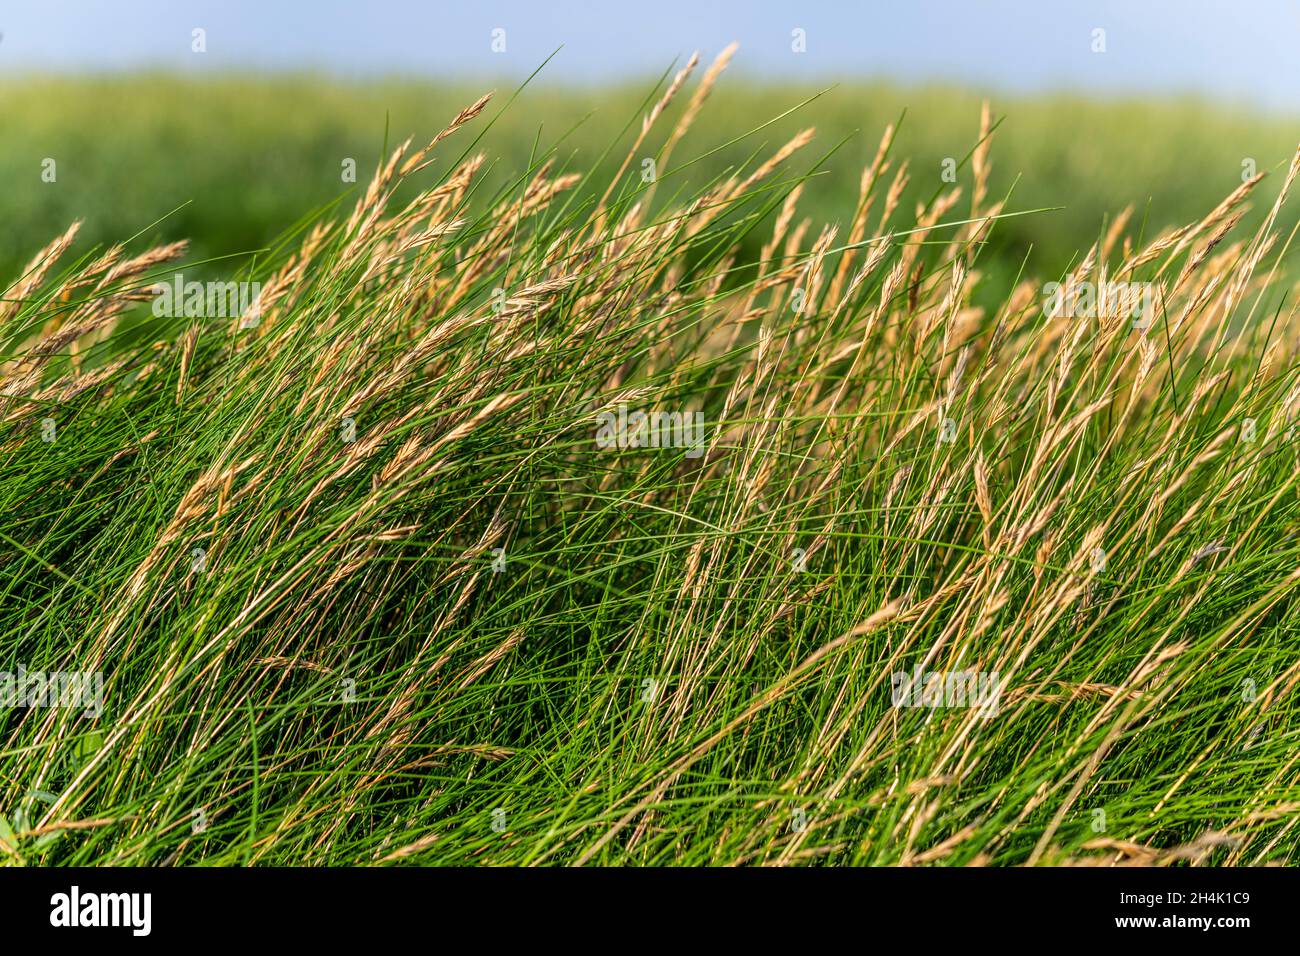 France, Somme, Bay of the Somme, Saint-Valery-sur-Somme, Cap Hornu, Puccinellia maritima Stock Photo